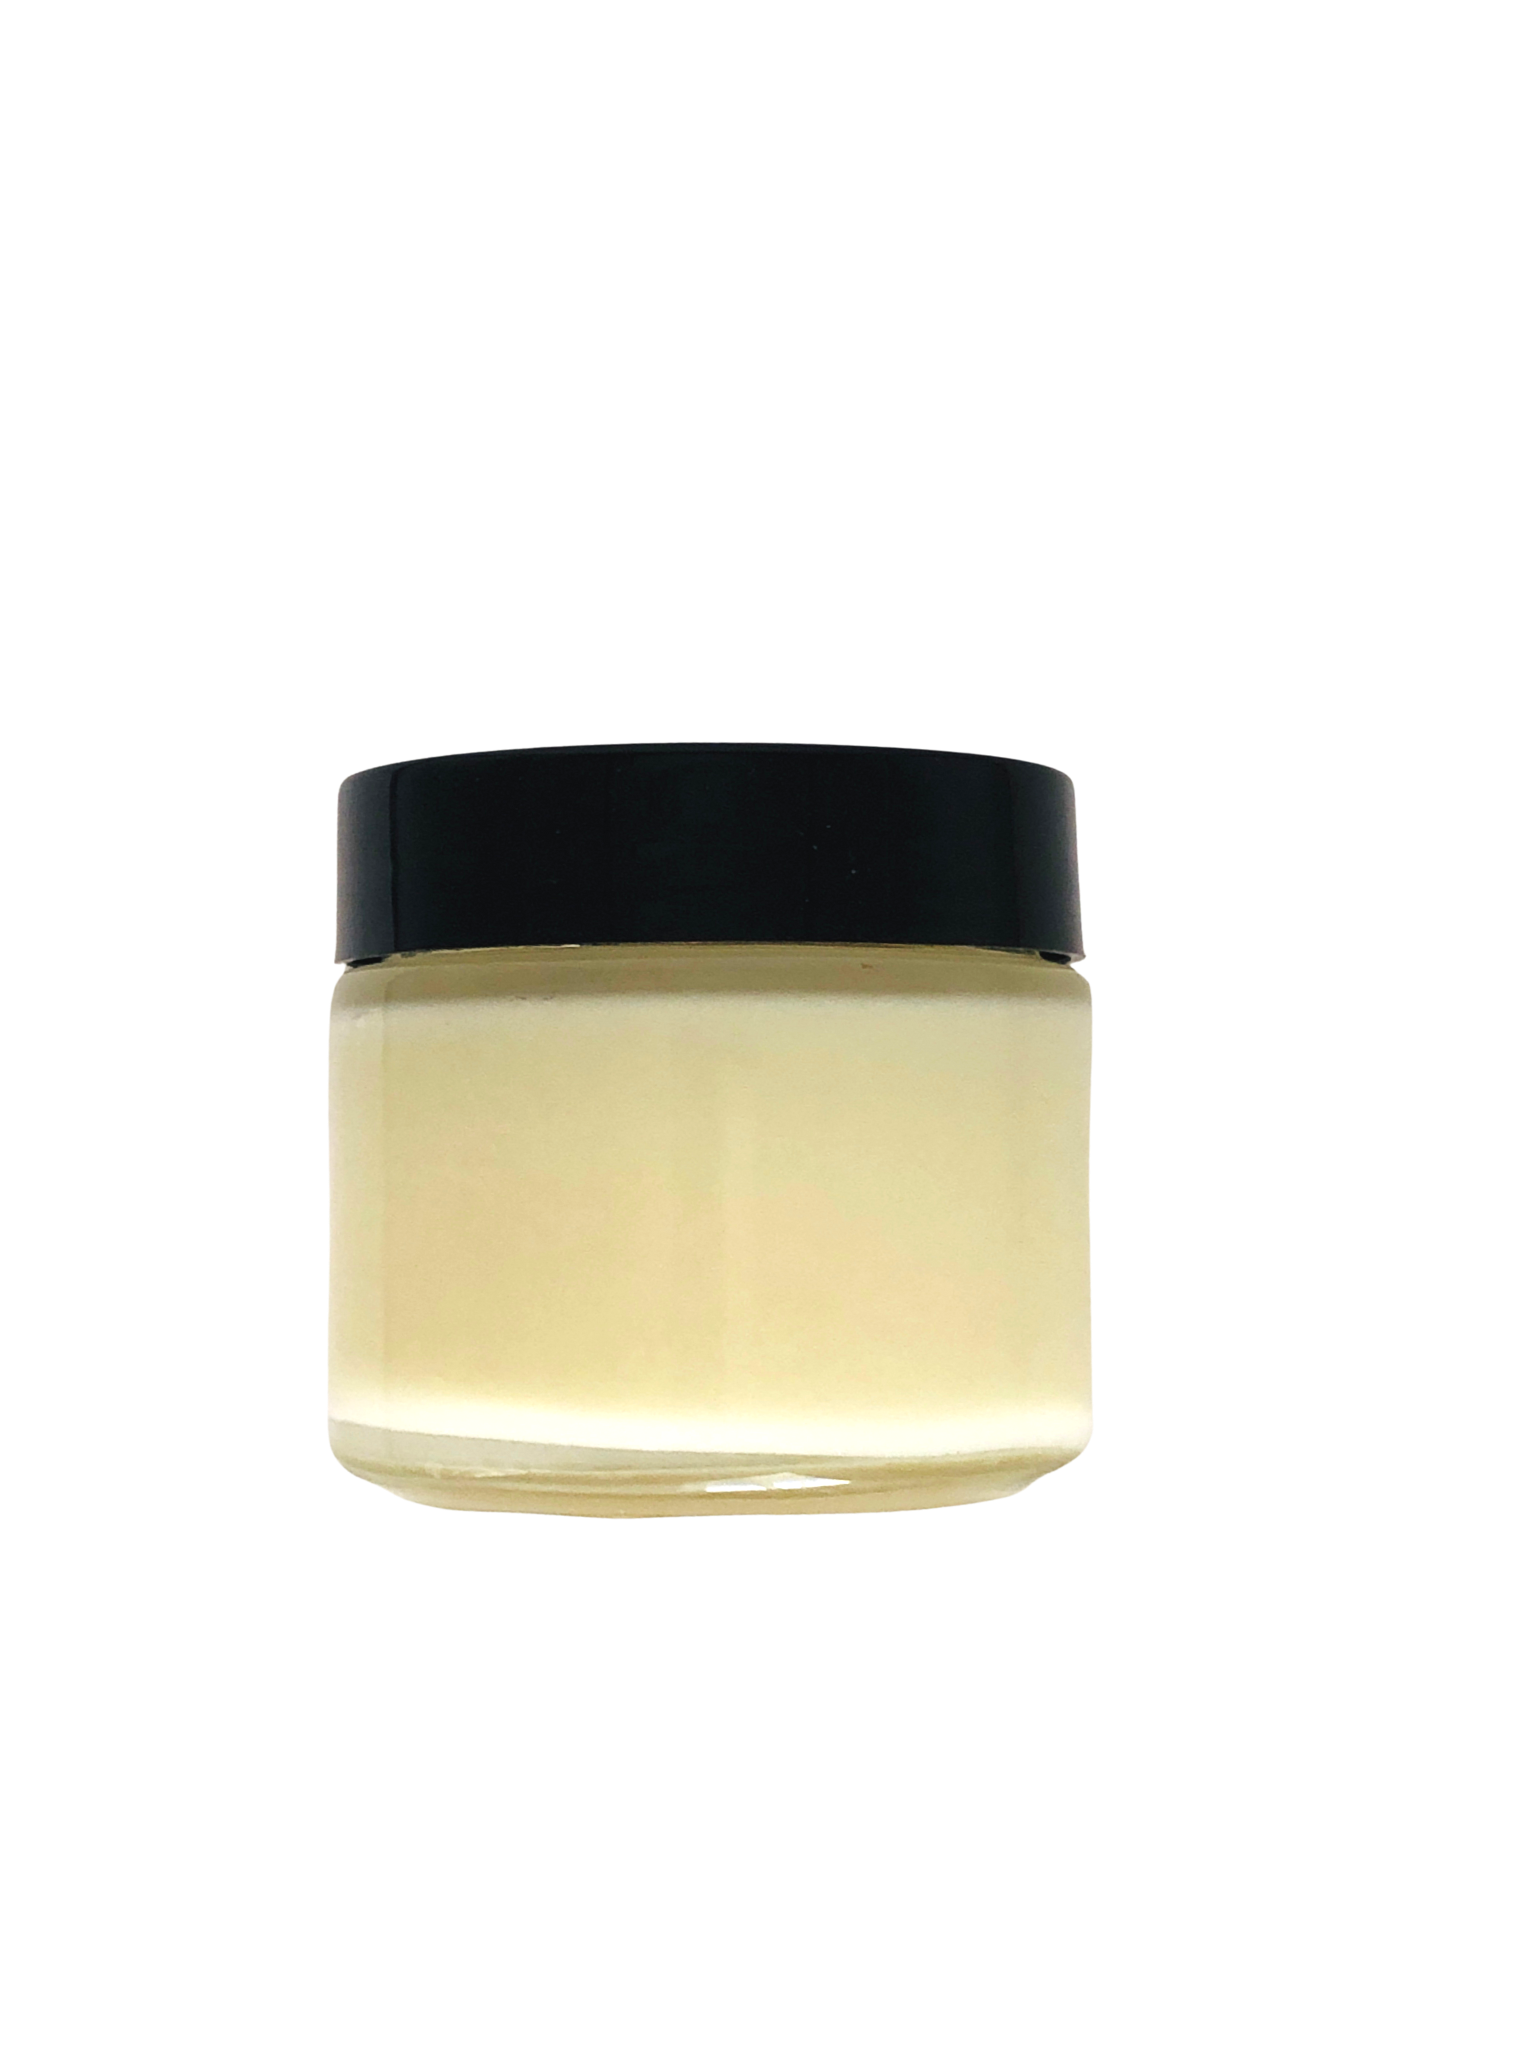 Honeysuckle Flameless Candle - Mystic Candles and Soaps LLC